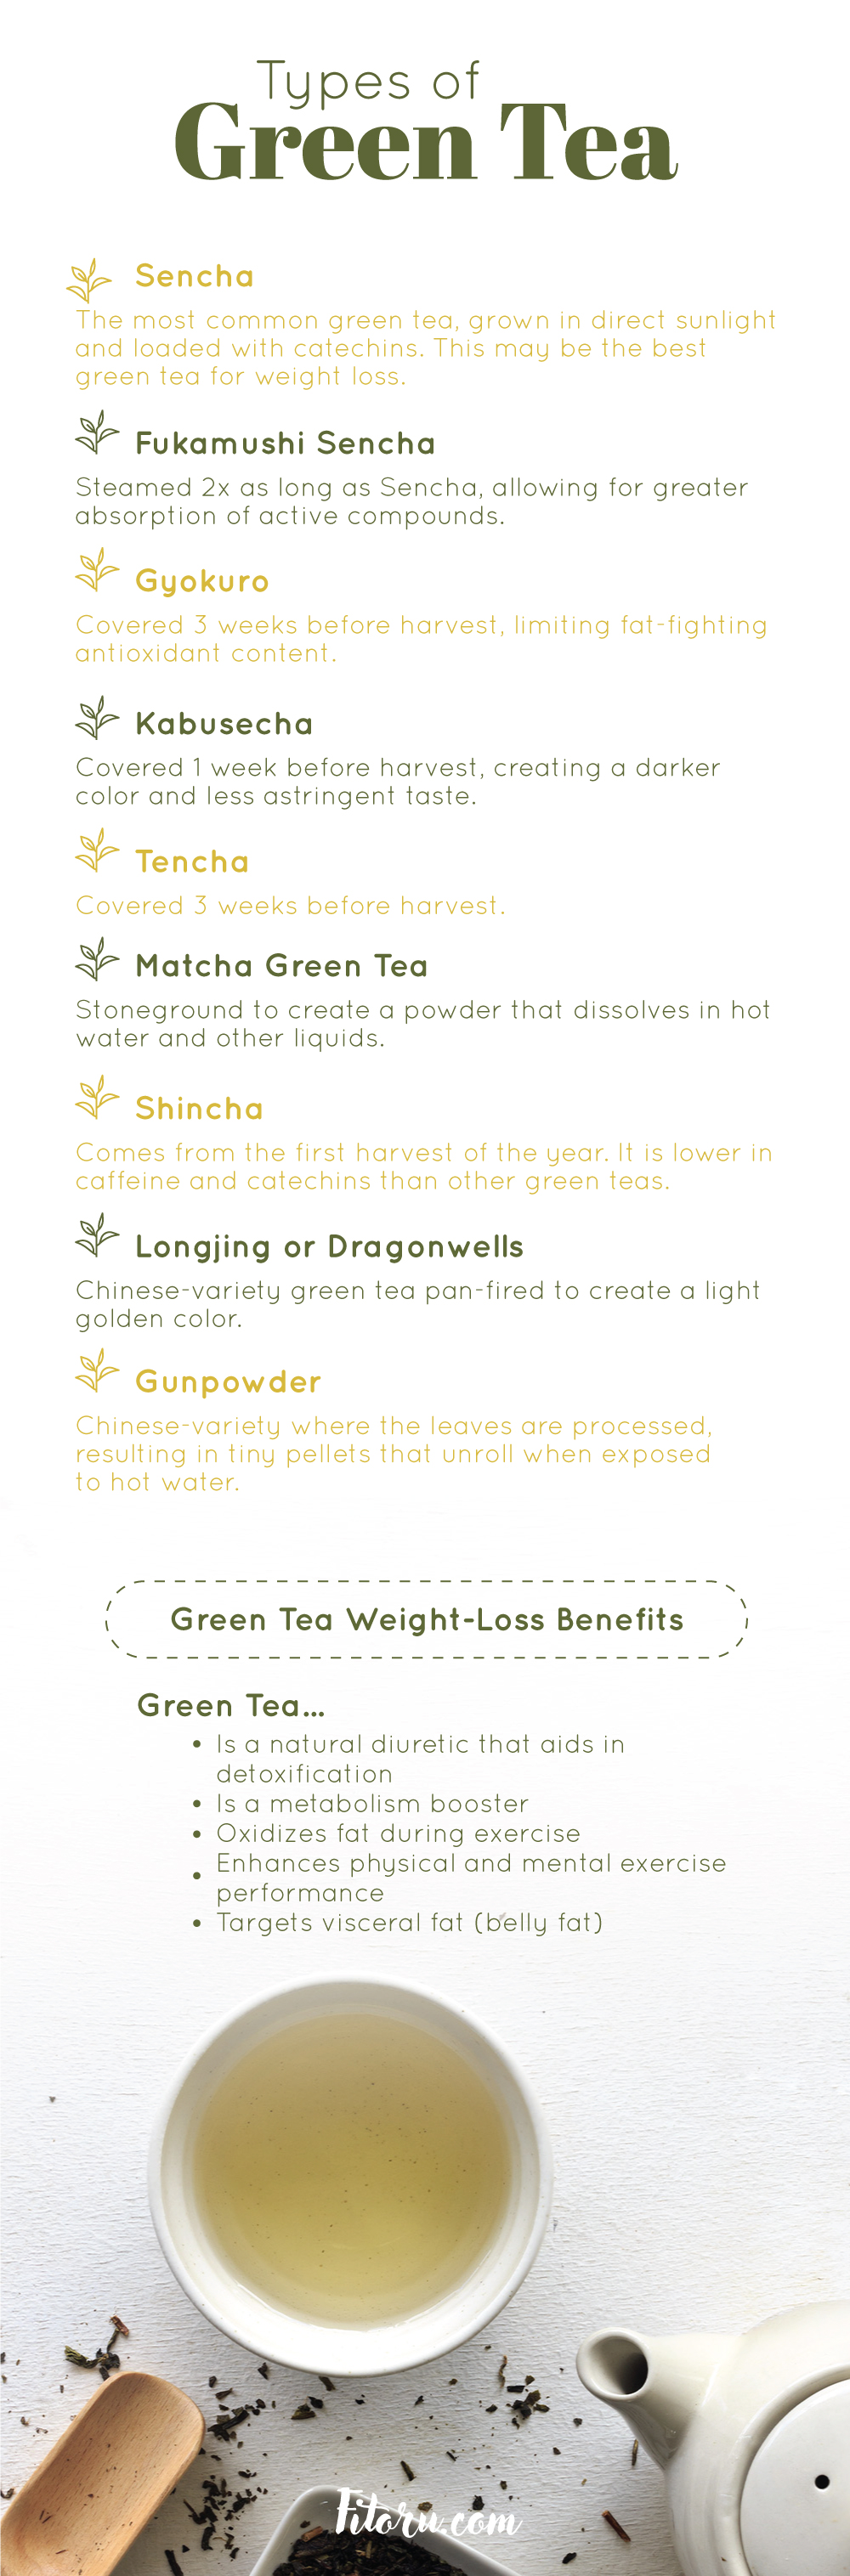 Are you ready to transform your body with green tea?